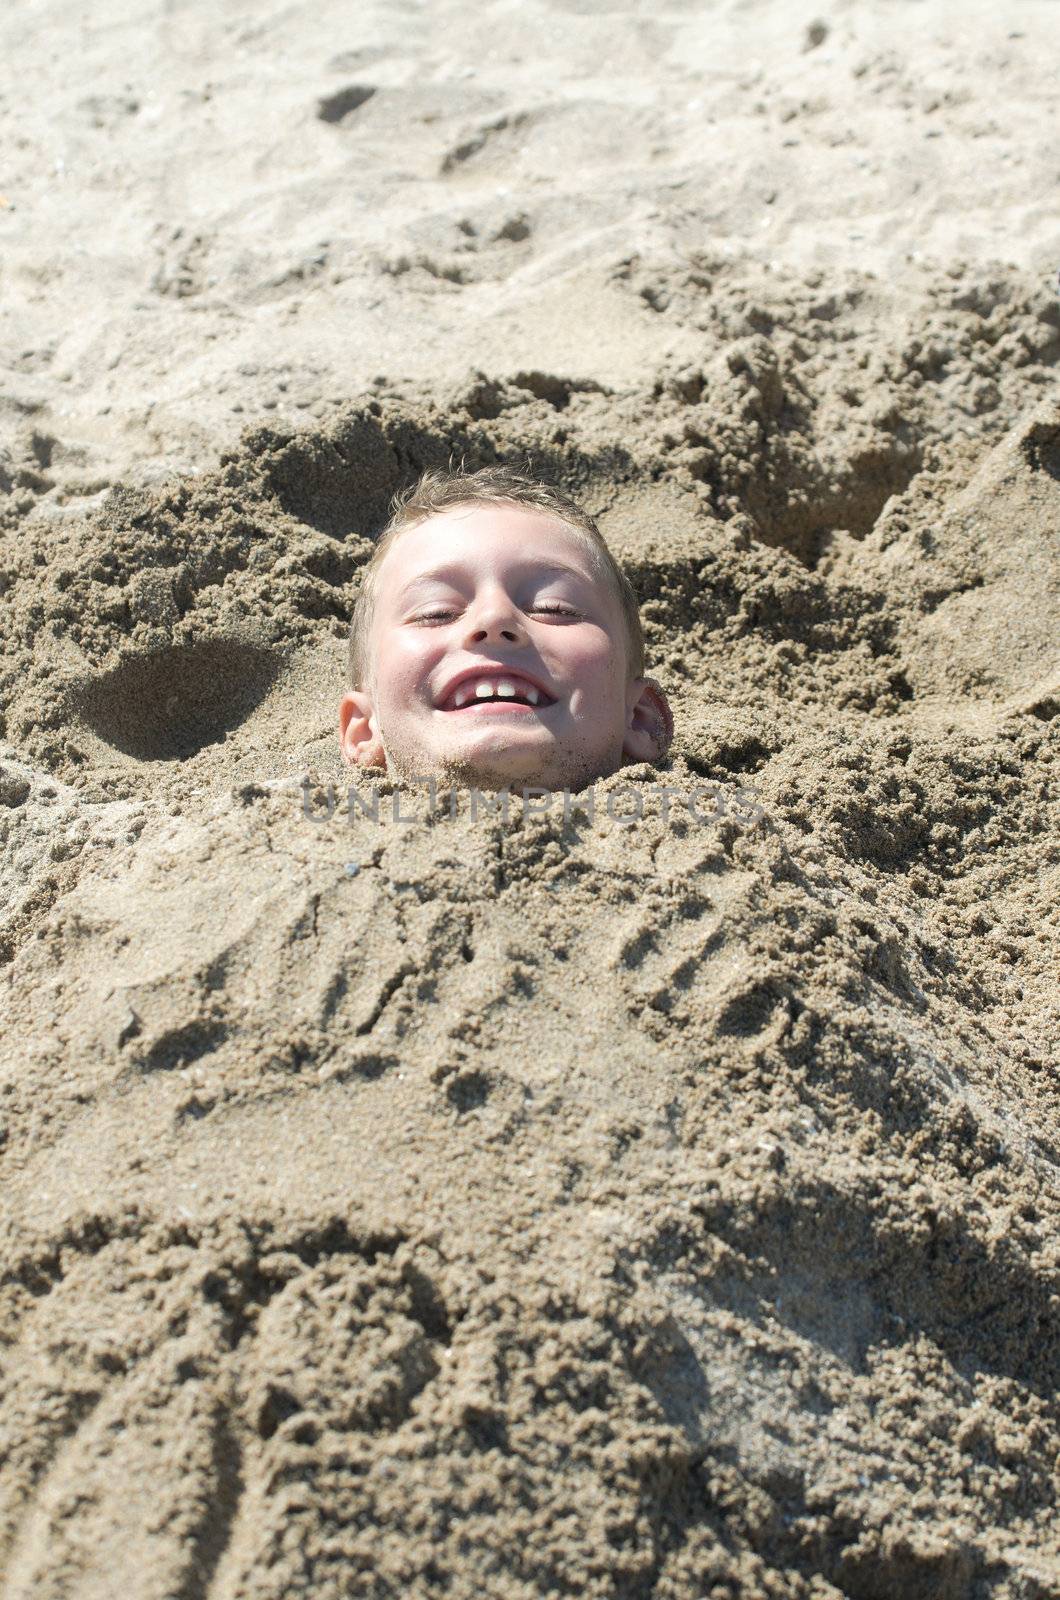 Child in the sand by silent47